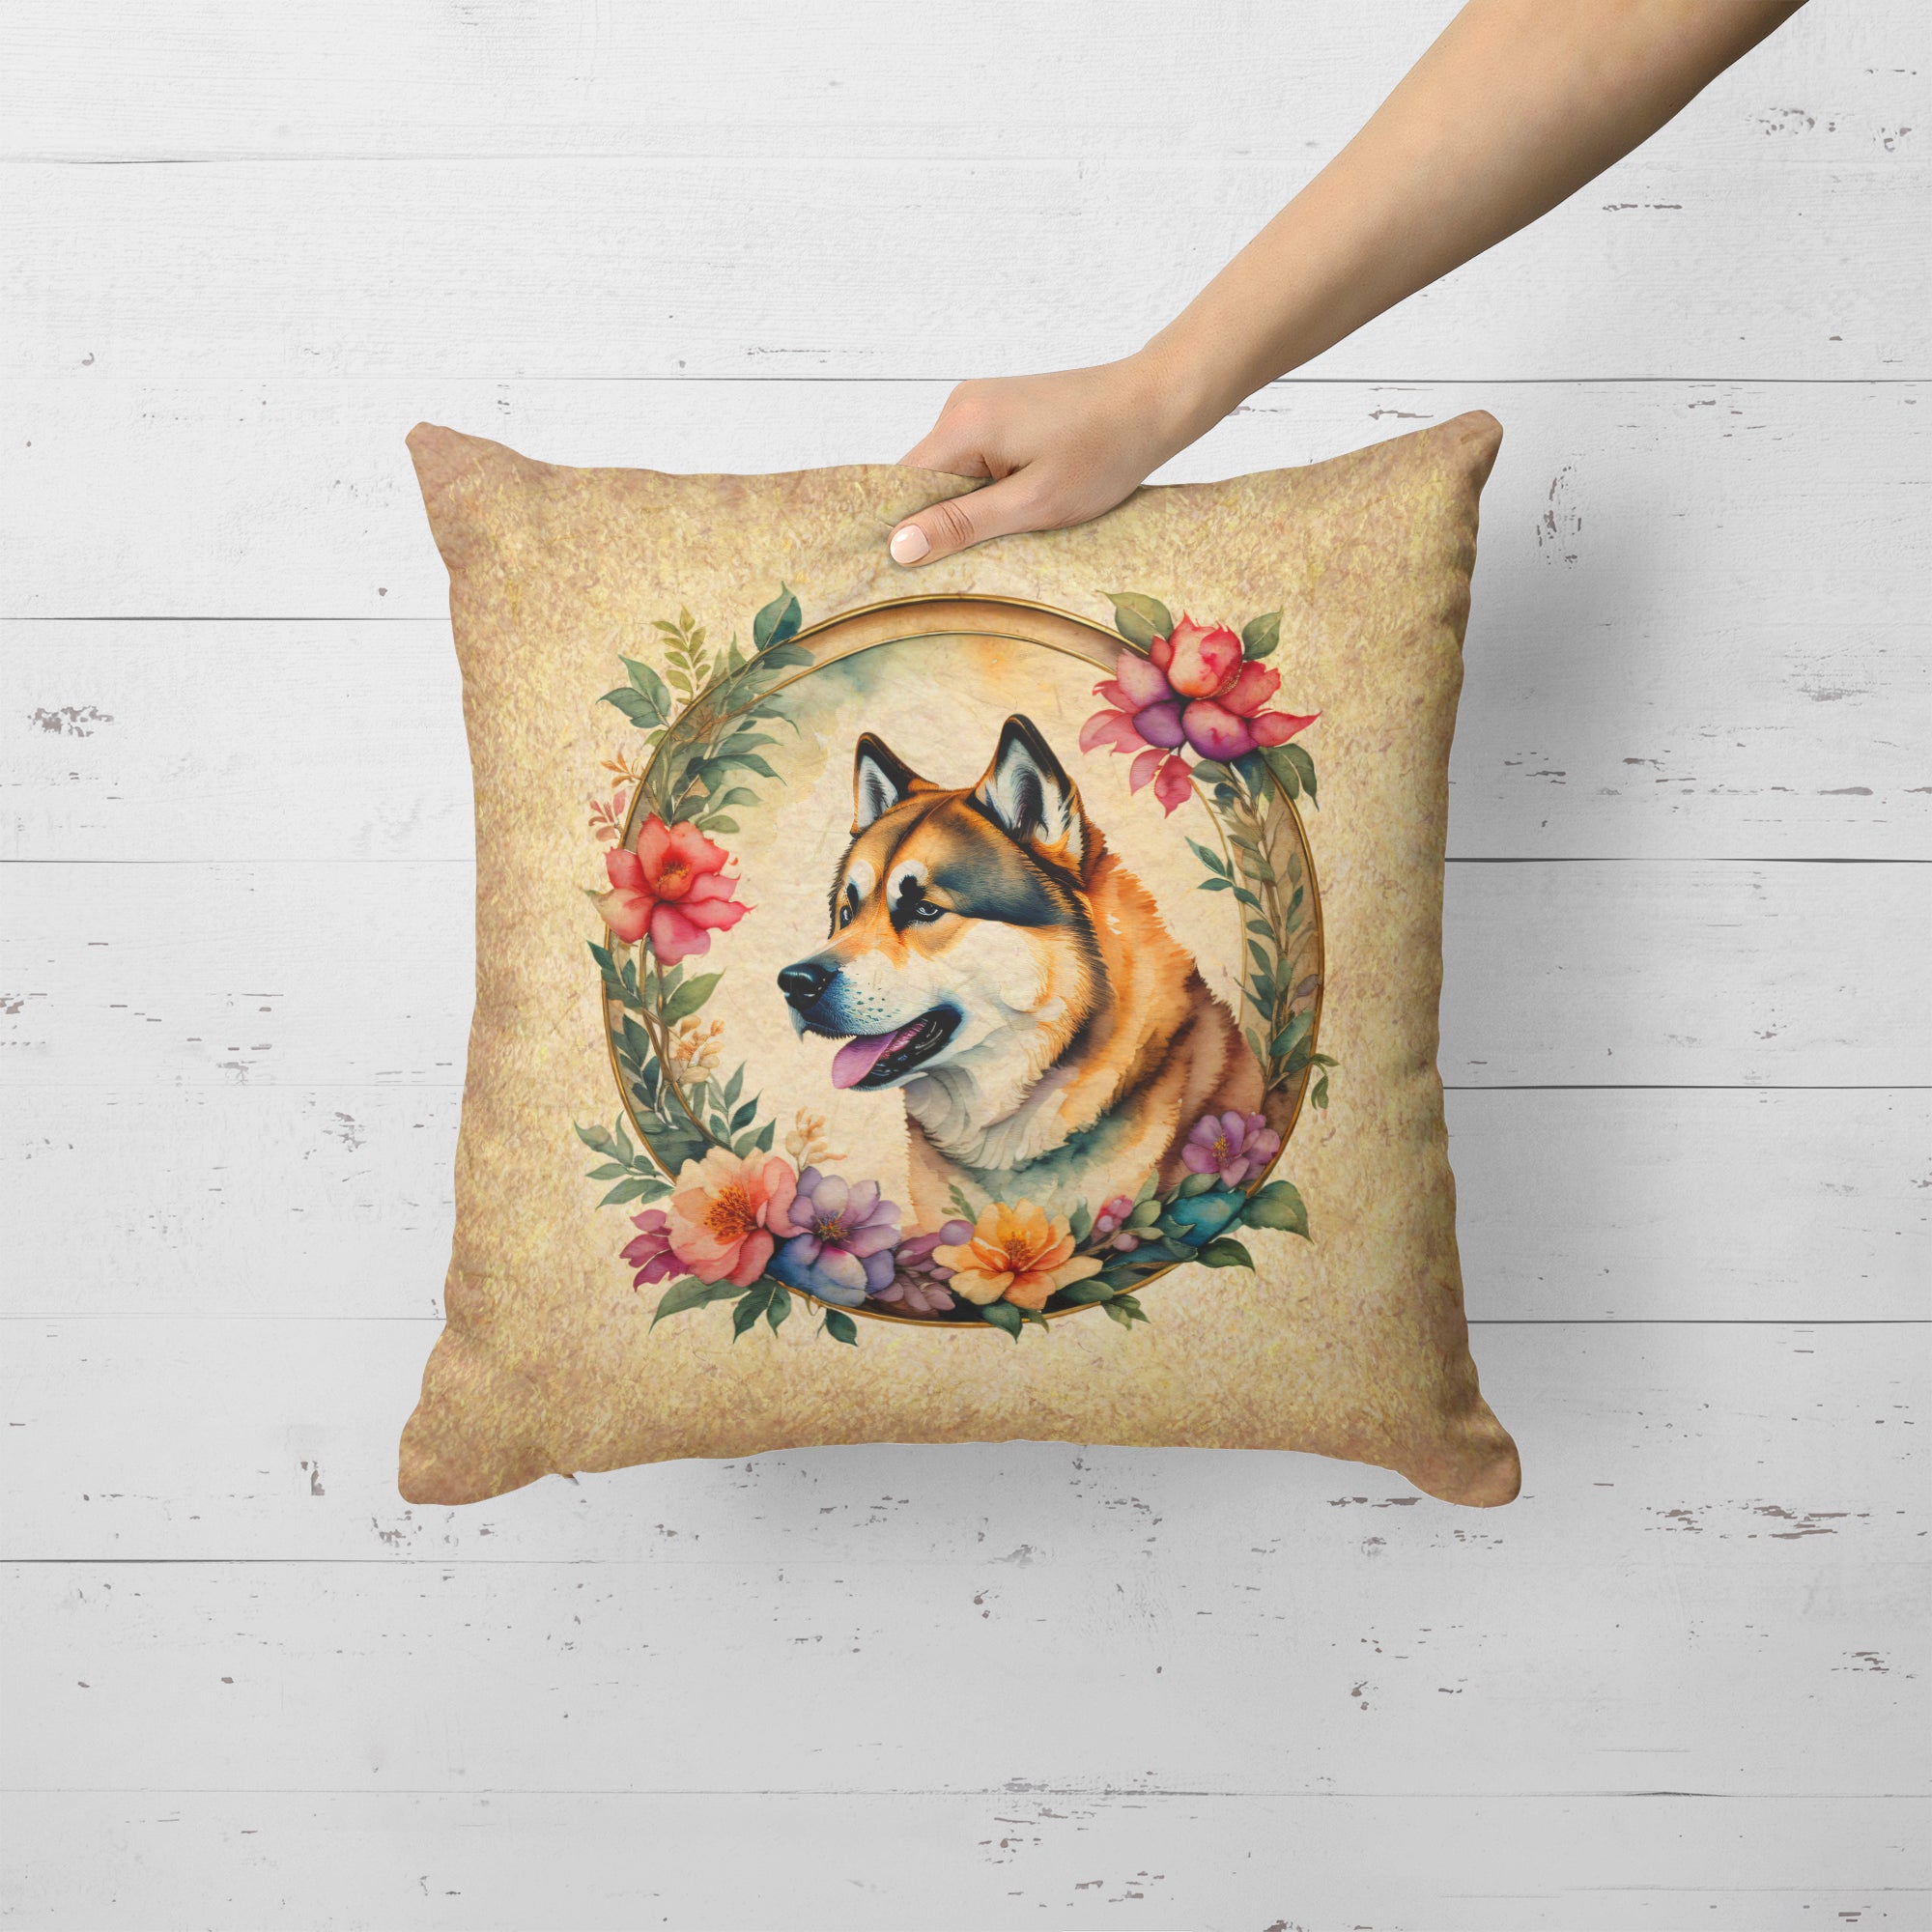 Buy this Akita and Flowers Fabric Decorative Pillow